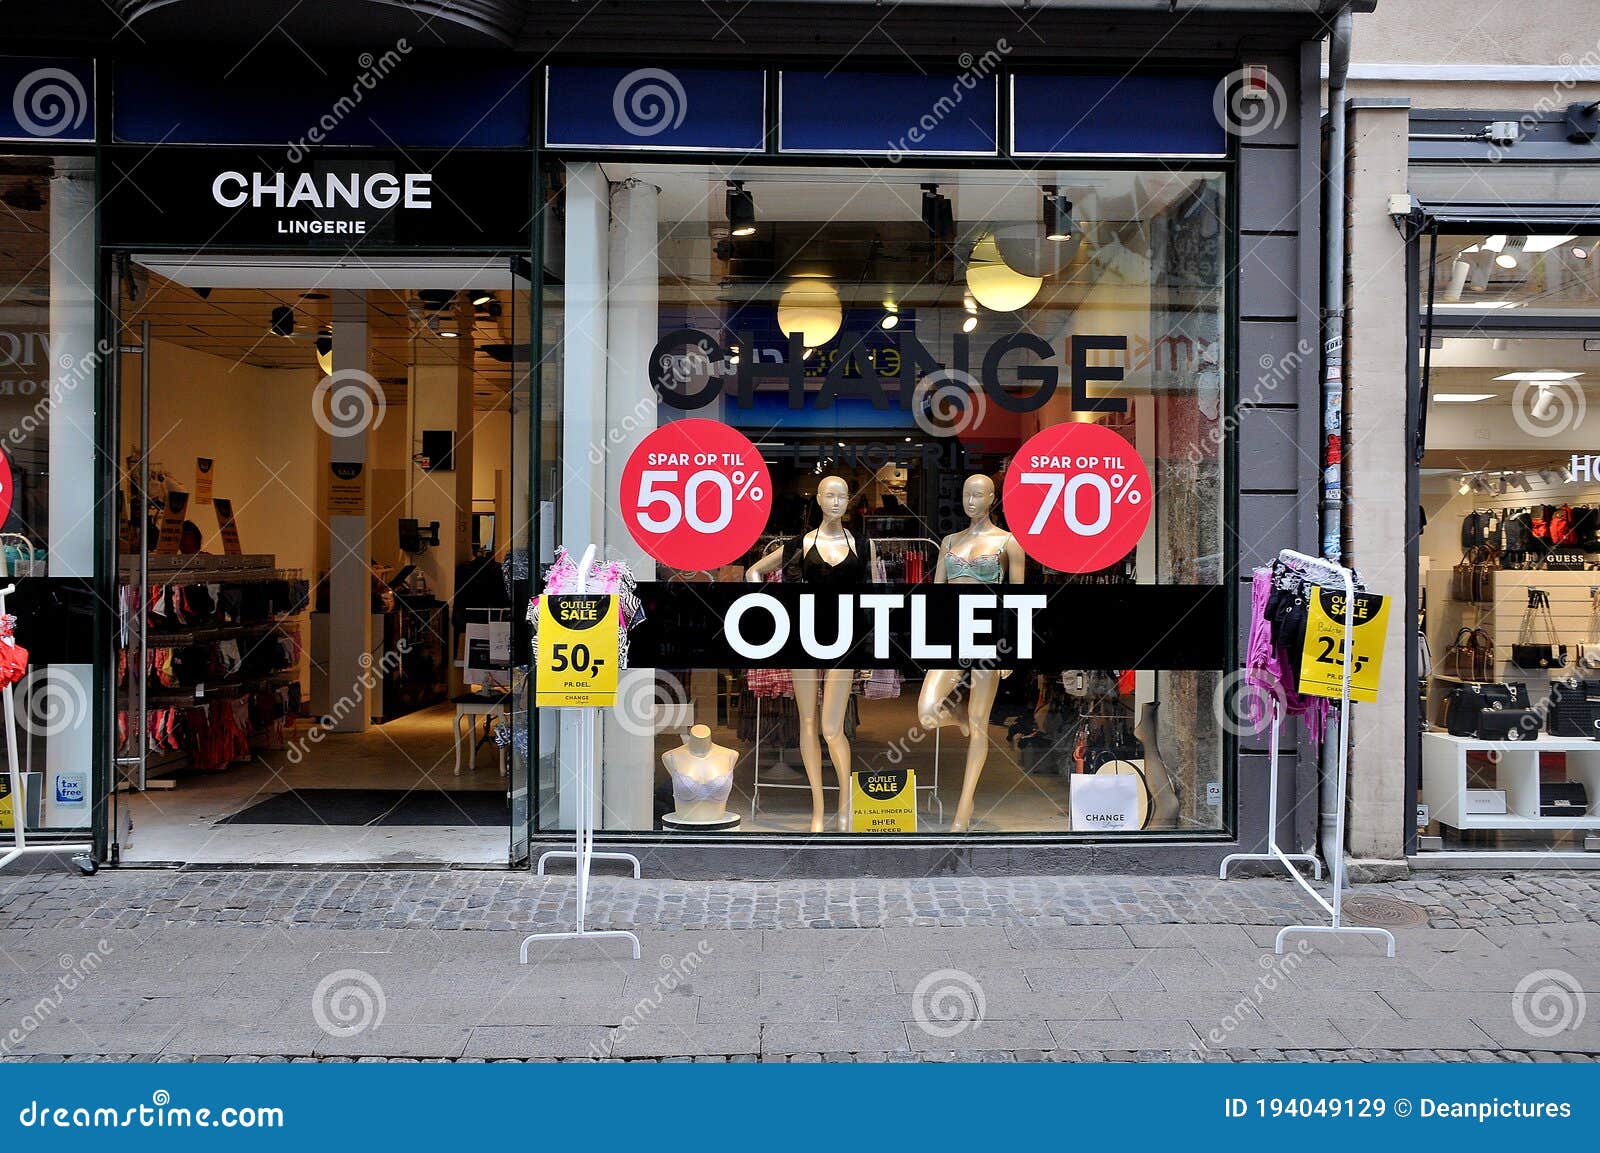 60 To 80 Off Sale At Outlet In Change Lingerie Store In Capial Editorial  Stock Image - Image of items, store: 194049129